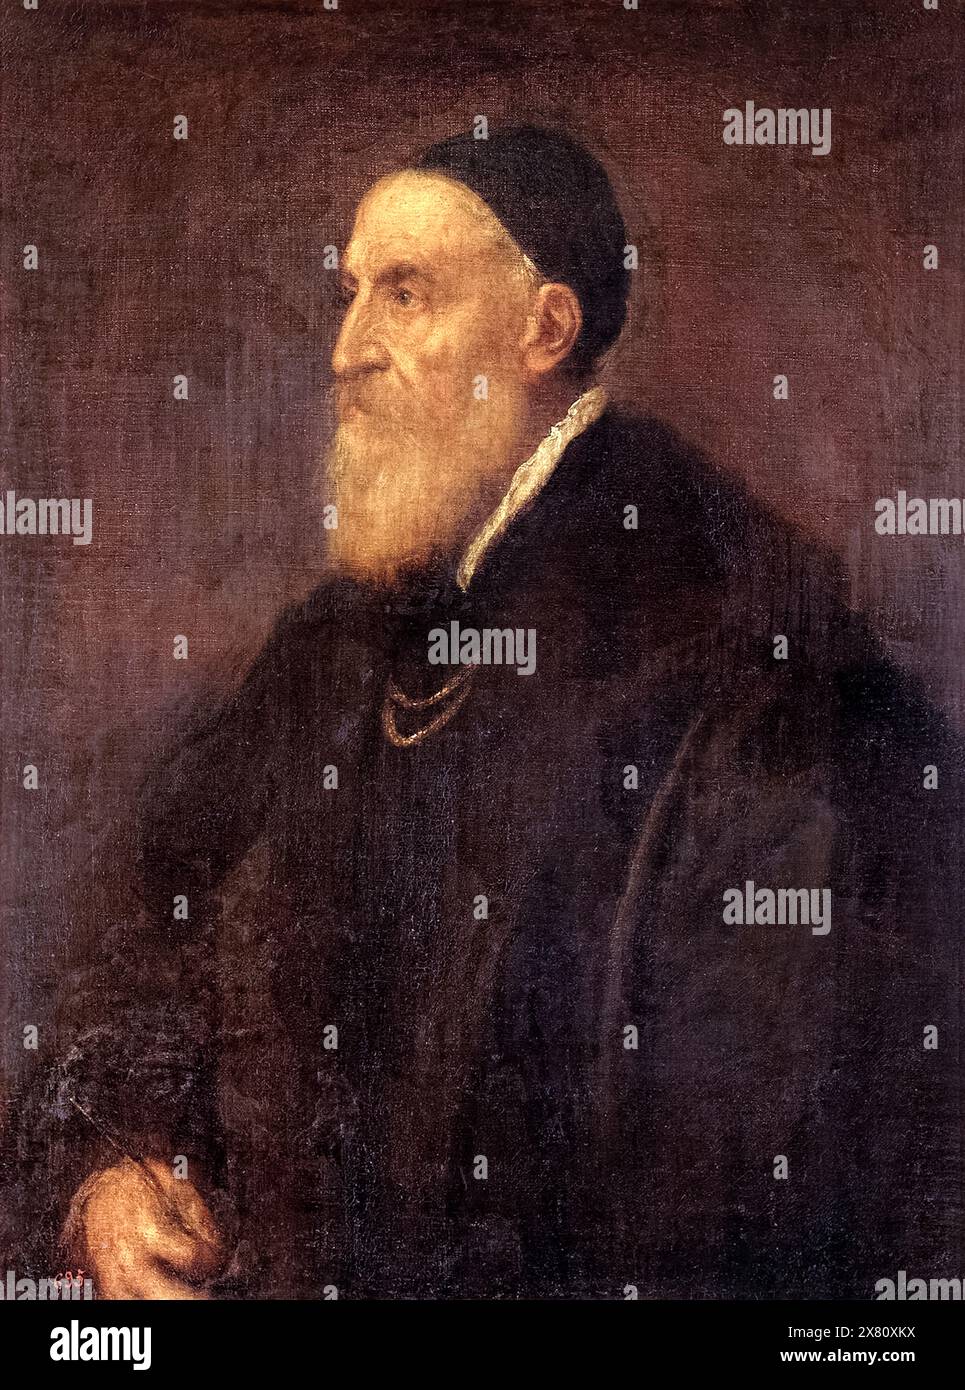 Titian Self-portrait by Venetian artist Titian (c.1490-1576) painted c,1567 wearing black and a golden chain showing his membership of the Holy Roman Empire’s Knights of the Golden Spur. Credit: Prado Museum / Universal Art Archive Stock Photo